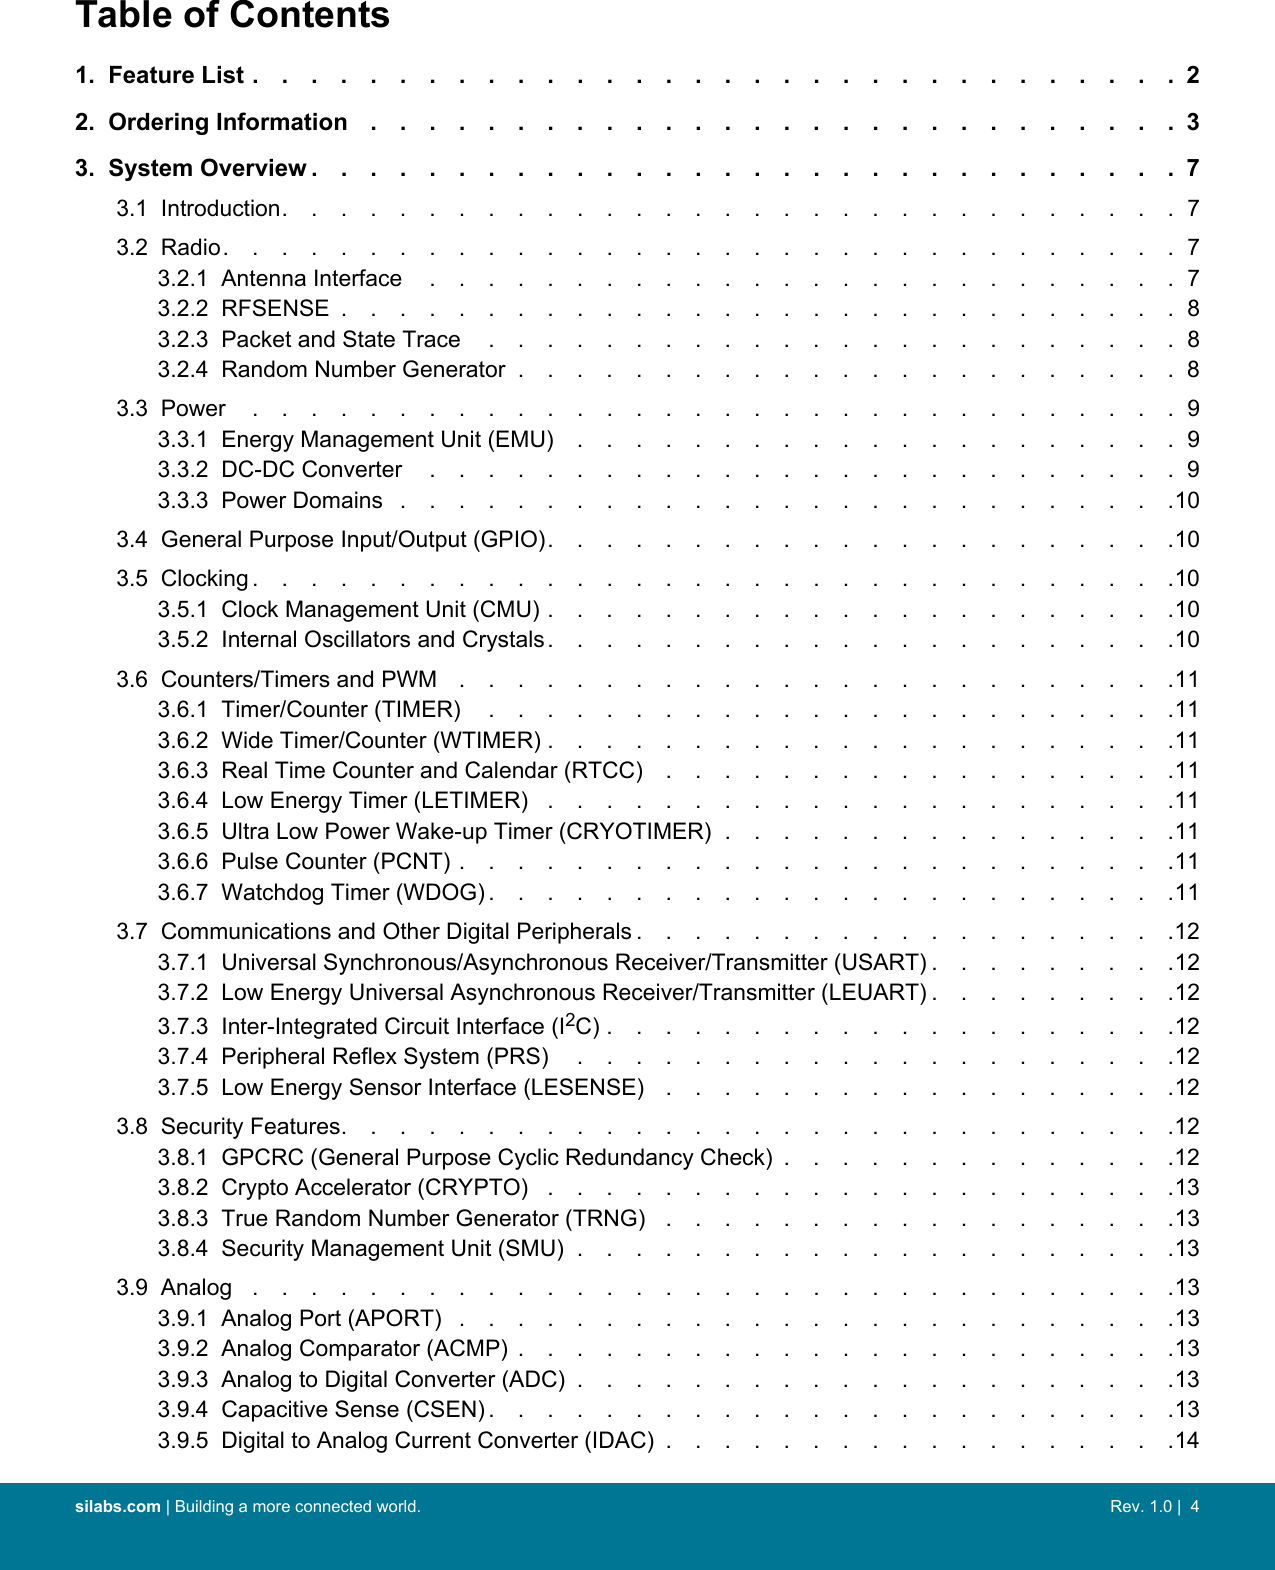 Table of Contents1.  Feature List ................................22.  Ordering Information ............................33.  System Overview ..............................73.1  Introduction...............................73.2  Radio.................................73.2.1  Antenna Interface ..........................73.2.2  RFSENSE .............................83.2.3  Packet and State Trace ........................83.2.4  Random Number Generator .......................83.3  Power ................................93.3.1  Energy Management Unit (EMU) .....................93.3.2  DC-DC Converter ..........................93.3.3  Power Domains ...........................103.4  General Purpose Input/Output (GPIO)......................103.5  Clocking ................................103.5.1  Clock Management Unit (CMU) ......................103.5.2  Internal Oscillators and Crystals......................103.6  Counters/Timers and PWM .........................113.6.1  Timer/Counter (TIMER) ........................113.6.2  Wide Timer/Counter (WTIMER) ......................113.6.3  Real Time Counter and Calendar (RTCC) ..................113.6.4  Low Energy Timer (LETIMER) ......................113.6.5  Ultra Low Power Wake-up Timer (CRYOTIMER) ................113.6.6  Pulse Counter (PCNT) .........................113.6.7  Watchdog Timer (WDOG) ........................113.7  Communications and Other Digital Peripherals ...................123.7.1  Universal Synchronous/Asynchronous Receiver/Transmitter (USART) .........123.7.2  Low Energy Universal Asynchronous Receiver/Transmitter (LEUART) .........123.7.3  Inter-Integrated Circuit Interface (I2C) ....................123.7.4  Peripheral Reflex System (PRS) .....................123.7.5  Low Energy Sensor Interface (LESENSE) ..................123.8  Security Features.............................123.8.1  GPCRC (General Purpose Cyclic Redundancy Check) ..............123.8.2  Crypto Accelerator (CRYPTO) ......................133.8.3  True Random Number Generator (TRNG) ..................133.8.4  Security Management Unit (SMU) .....................133.9  Analog ................................133.9.1  Analog Port (APORT) .........................133.9.2  Analog Comparator (ACMP) .......................133.9.3  Analog to Digital Converter (ADC) .....................133.9.4  Capacitive Sense (CSEN) ........................133.9.5  Digital to Analog Current Converter (IDAC) ..................14silabs.com | Building a more connected world. Rev. 1.0 |  4